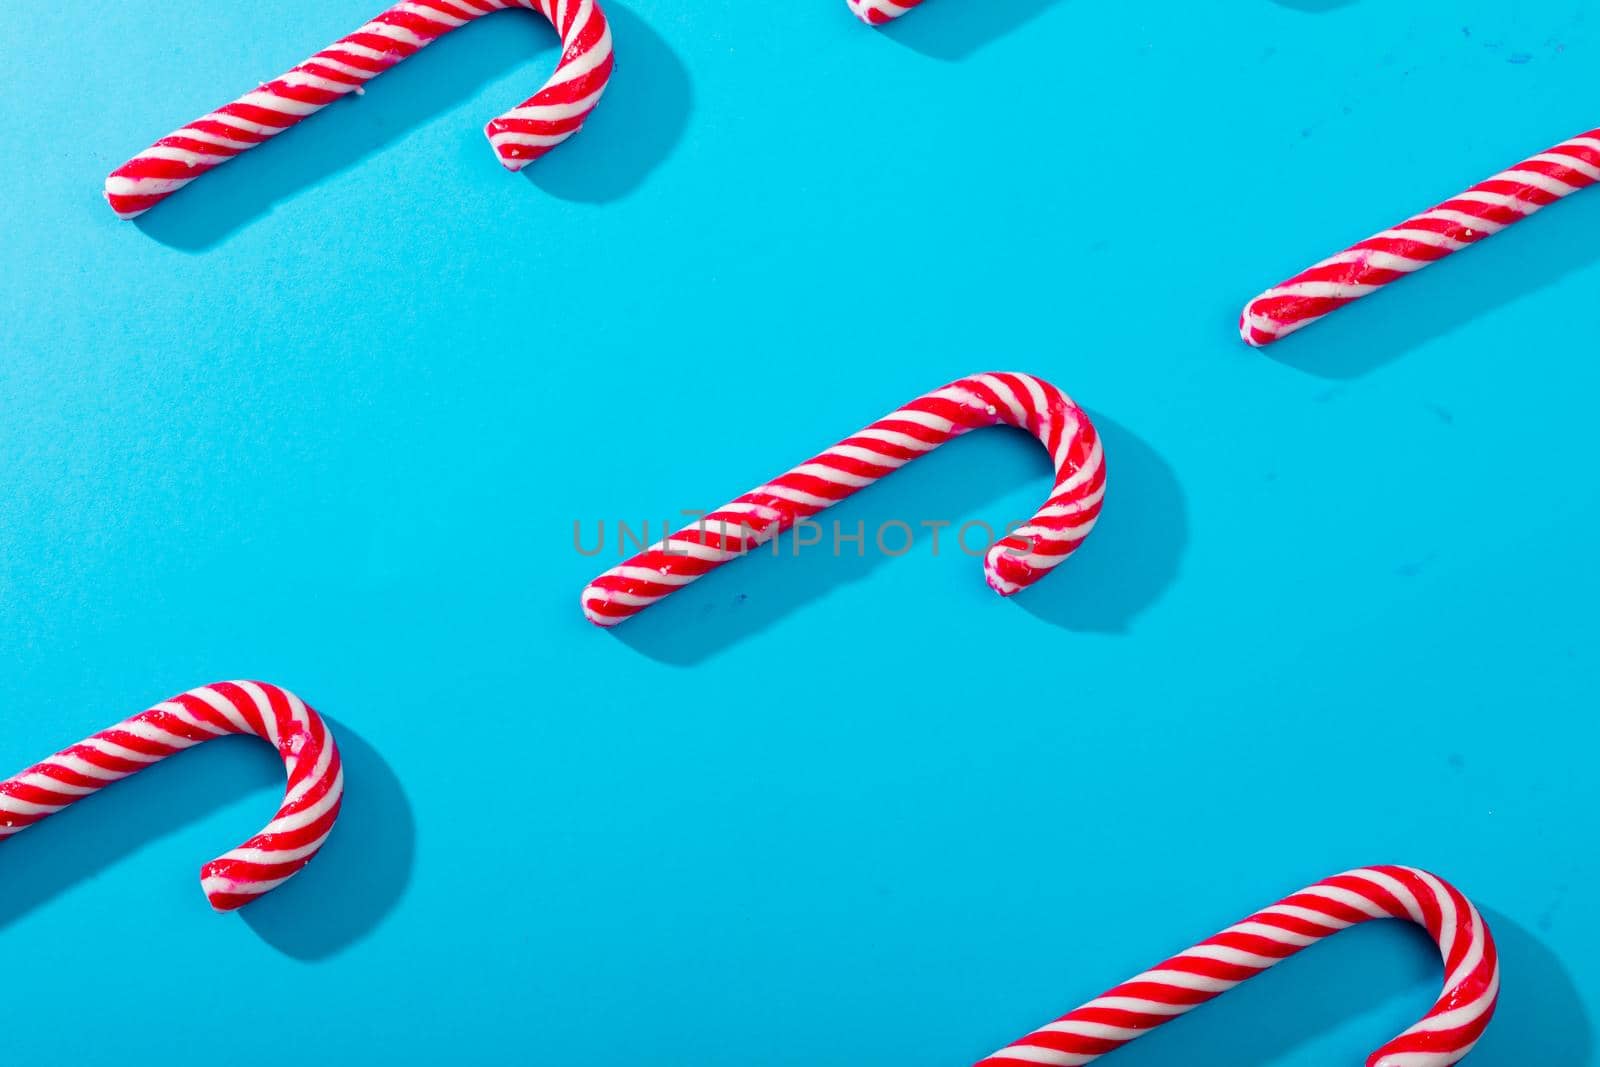 Composition of multiple rows of candy canes on blue background by Wavebreakmedia